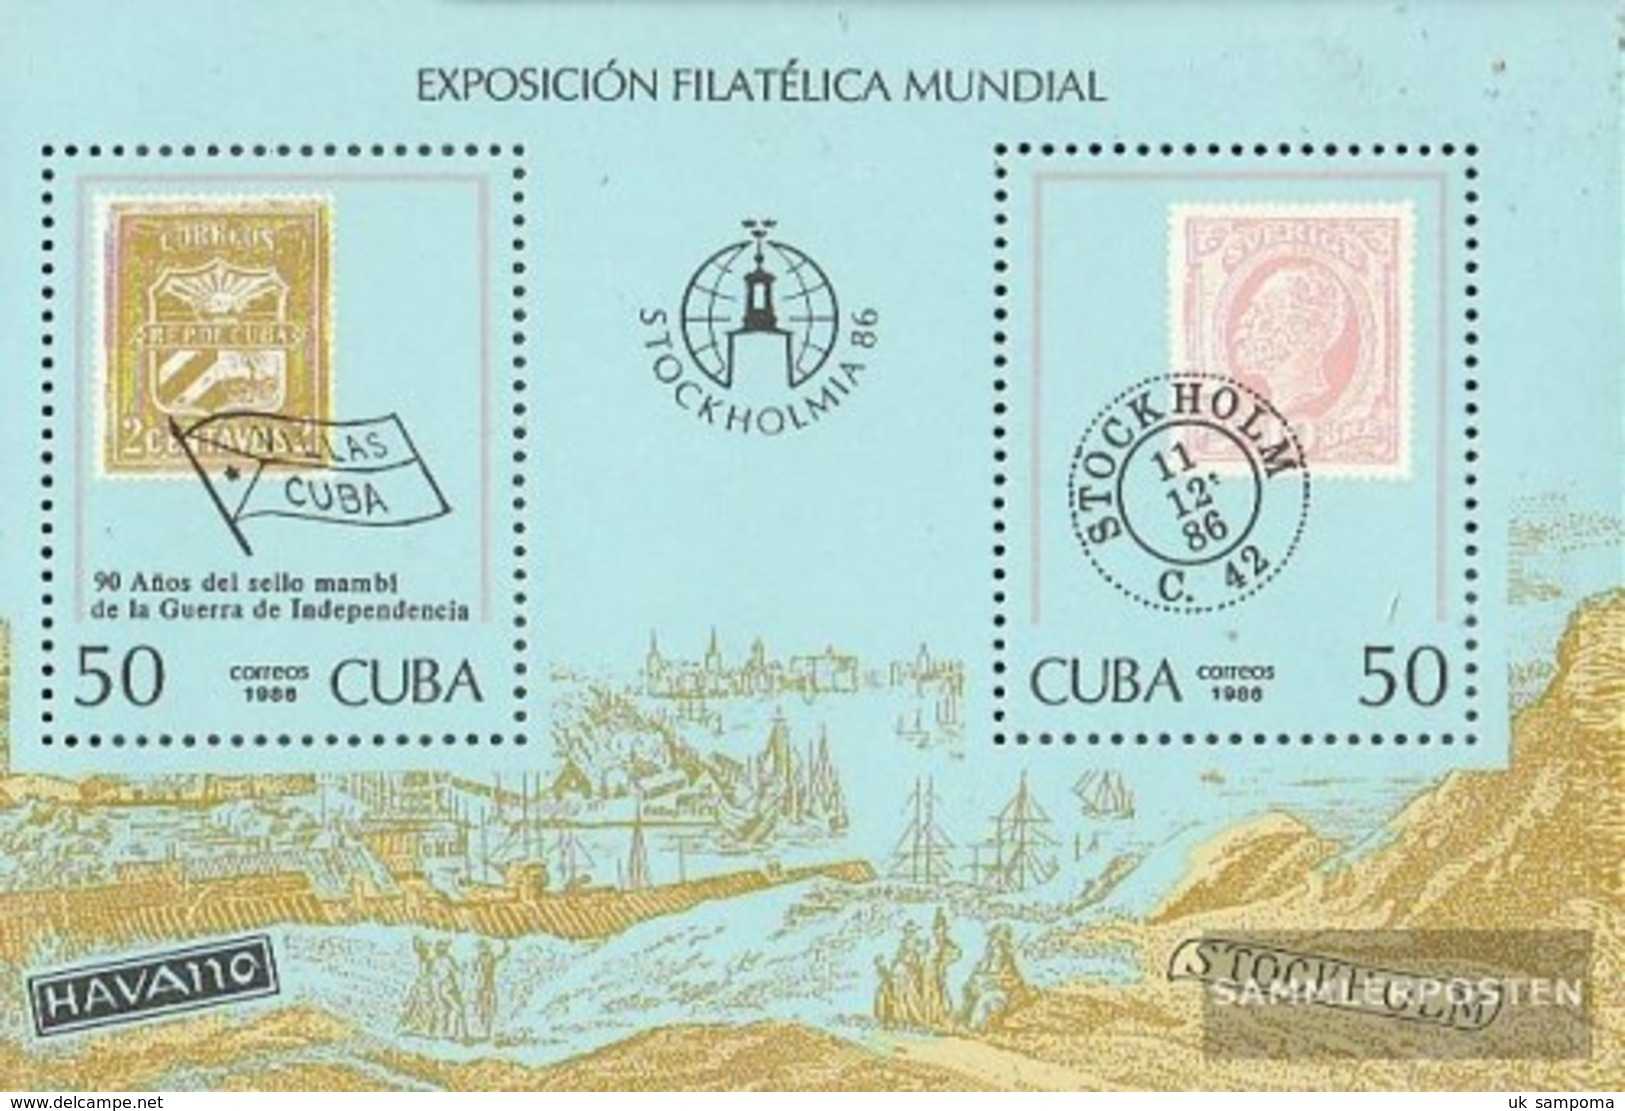 Cuba Block96 (complete.issue) Fine Used / Cancelled 1986 STOCKHOLMIA 86 - Blocks & Sheetlets